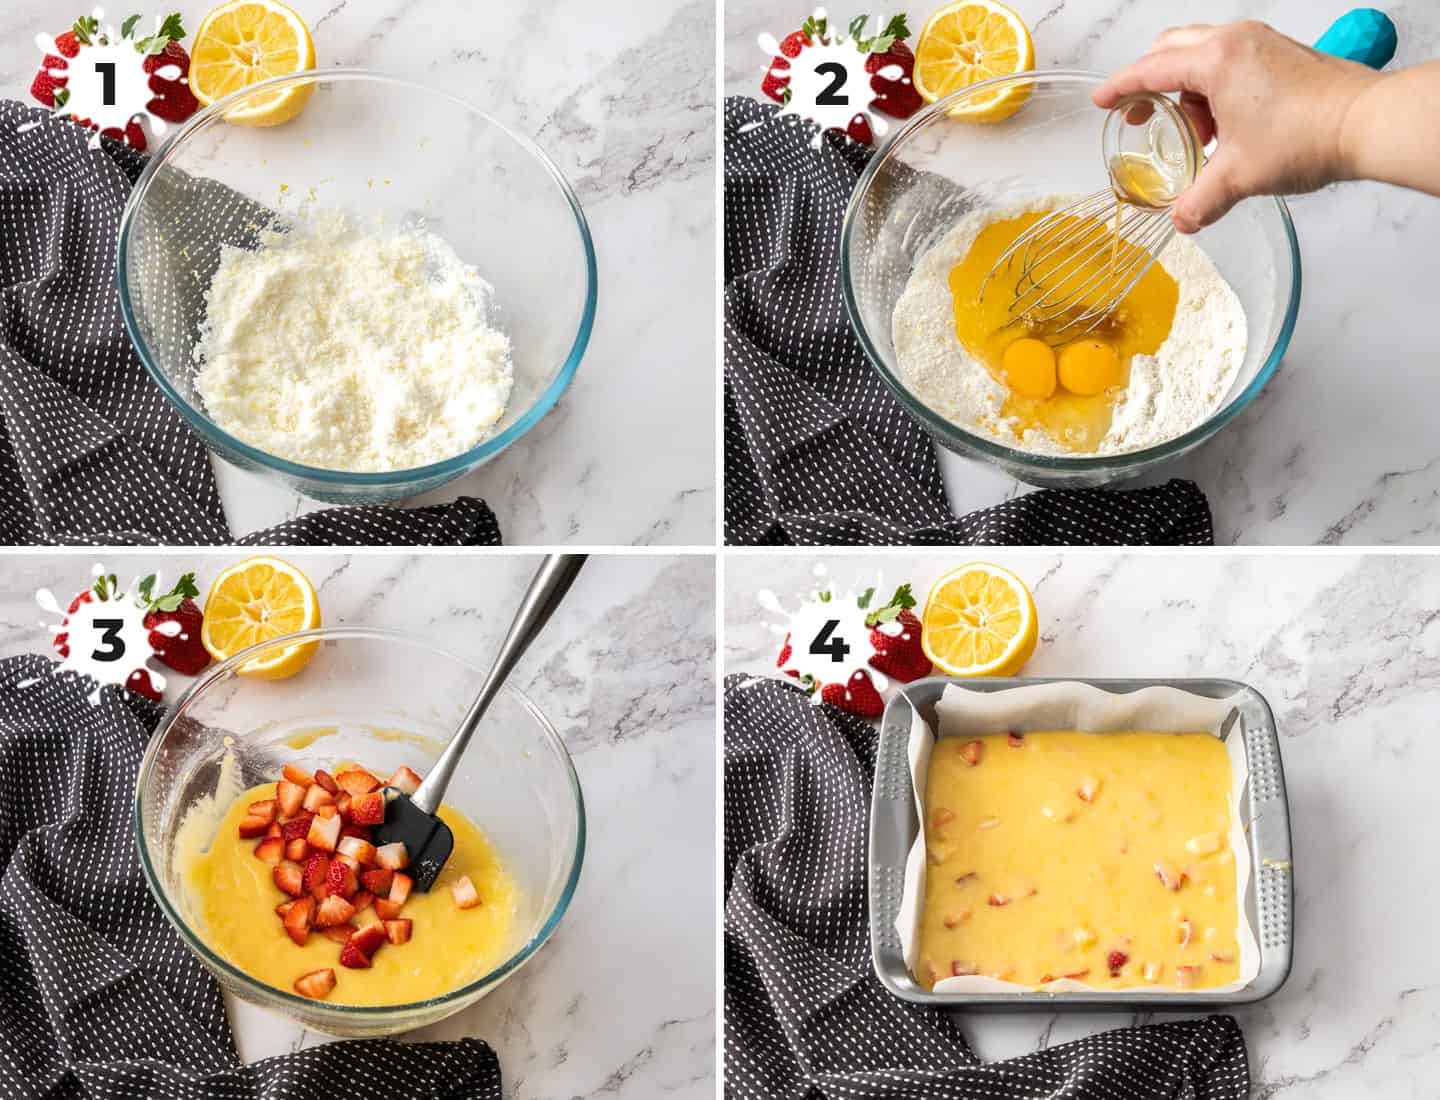 A collage of 4 images showing how to mix up the blondie batter.